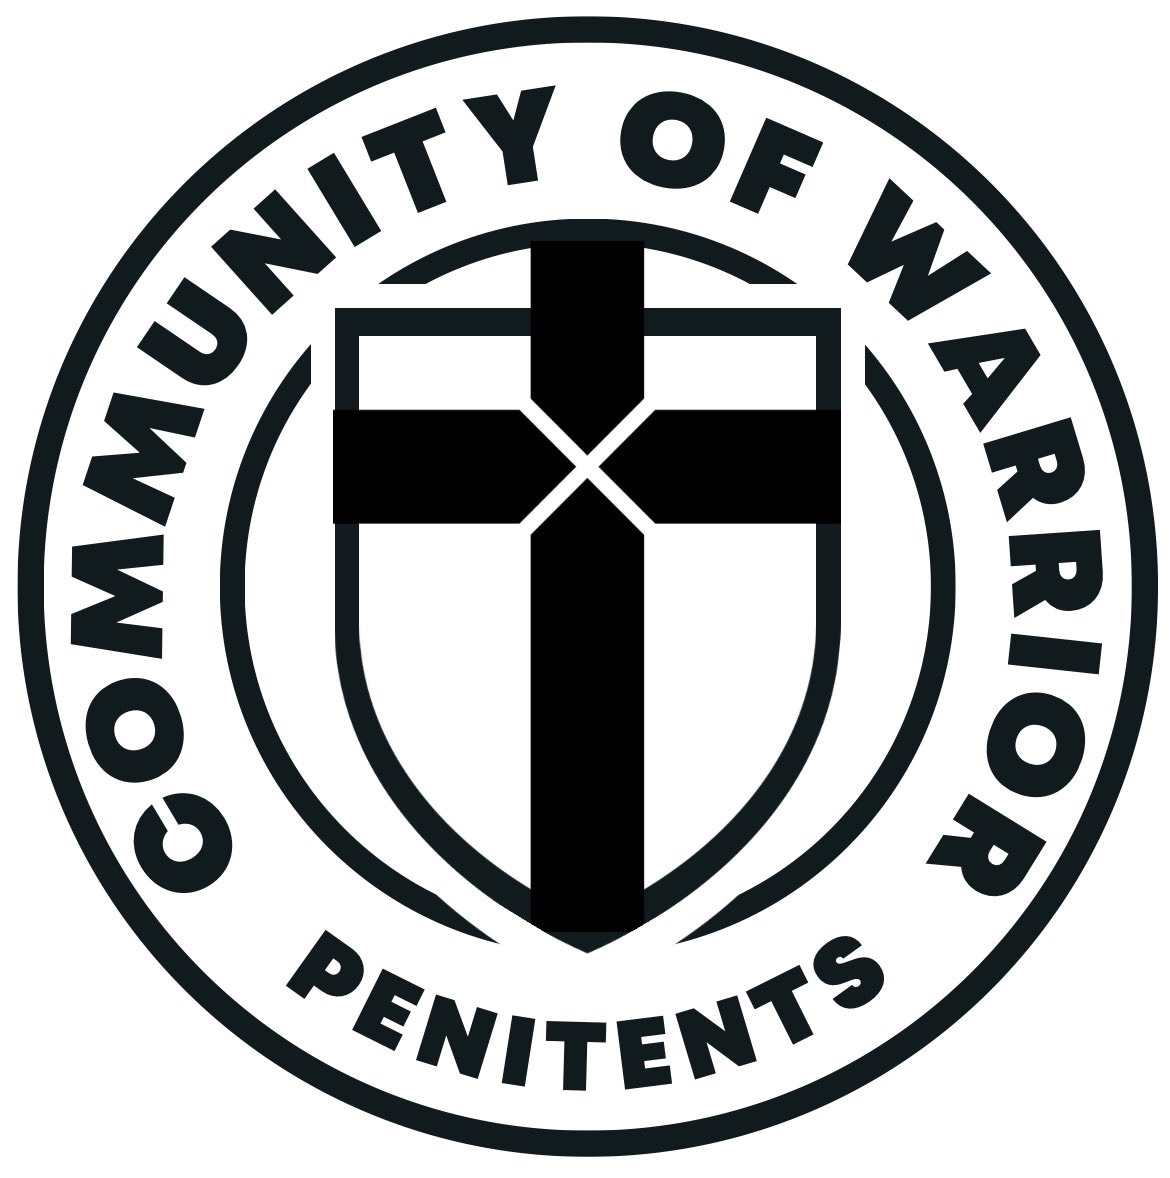 The Community of Warrior Penitents